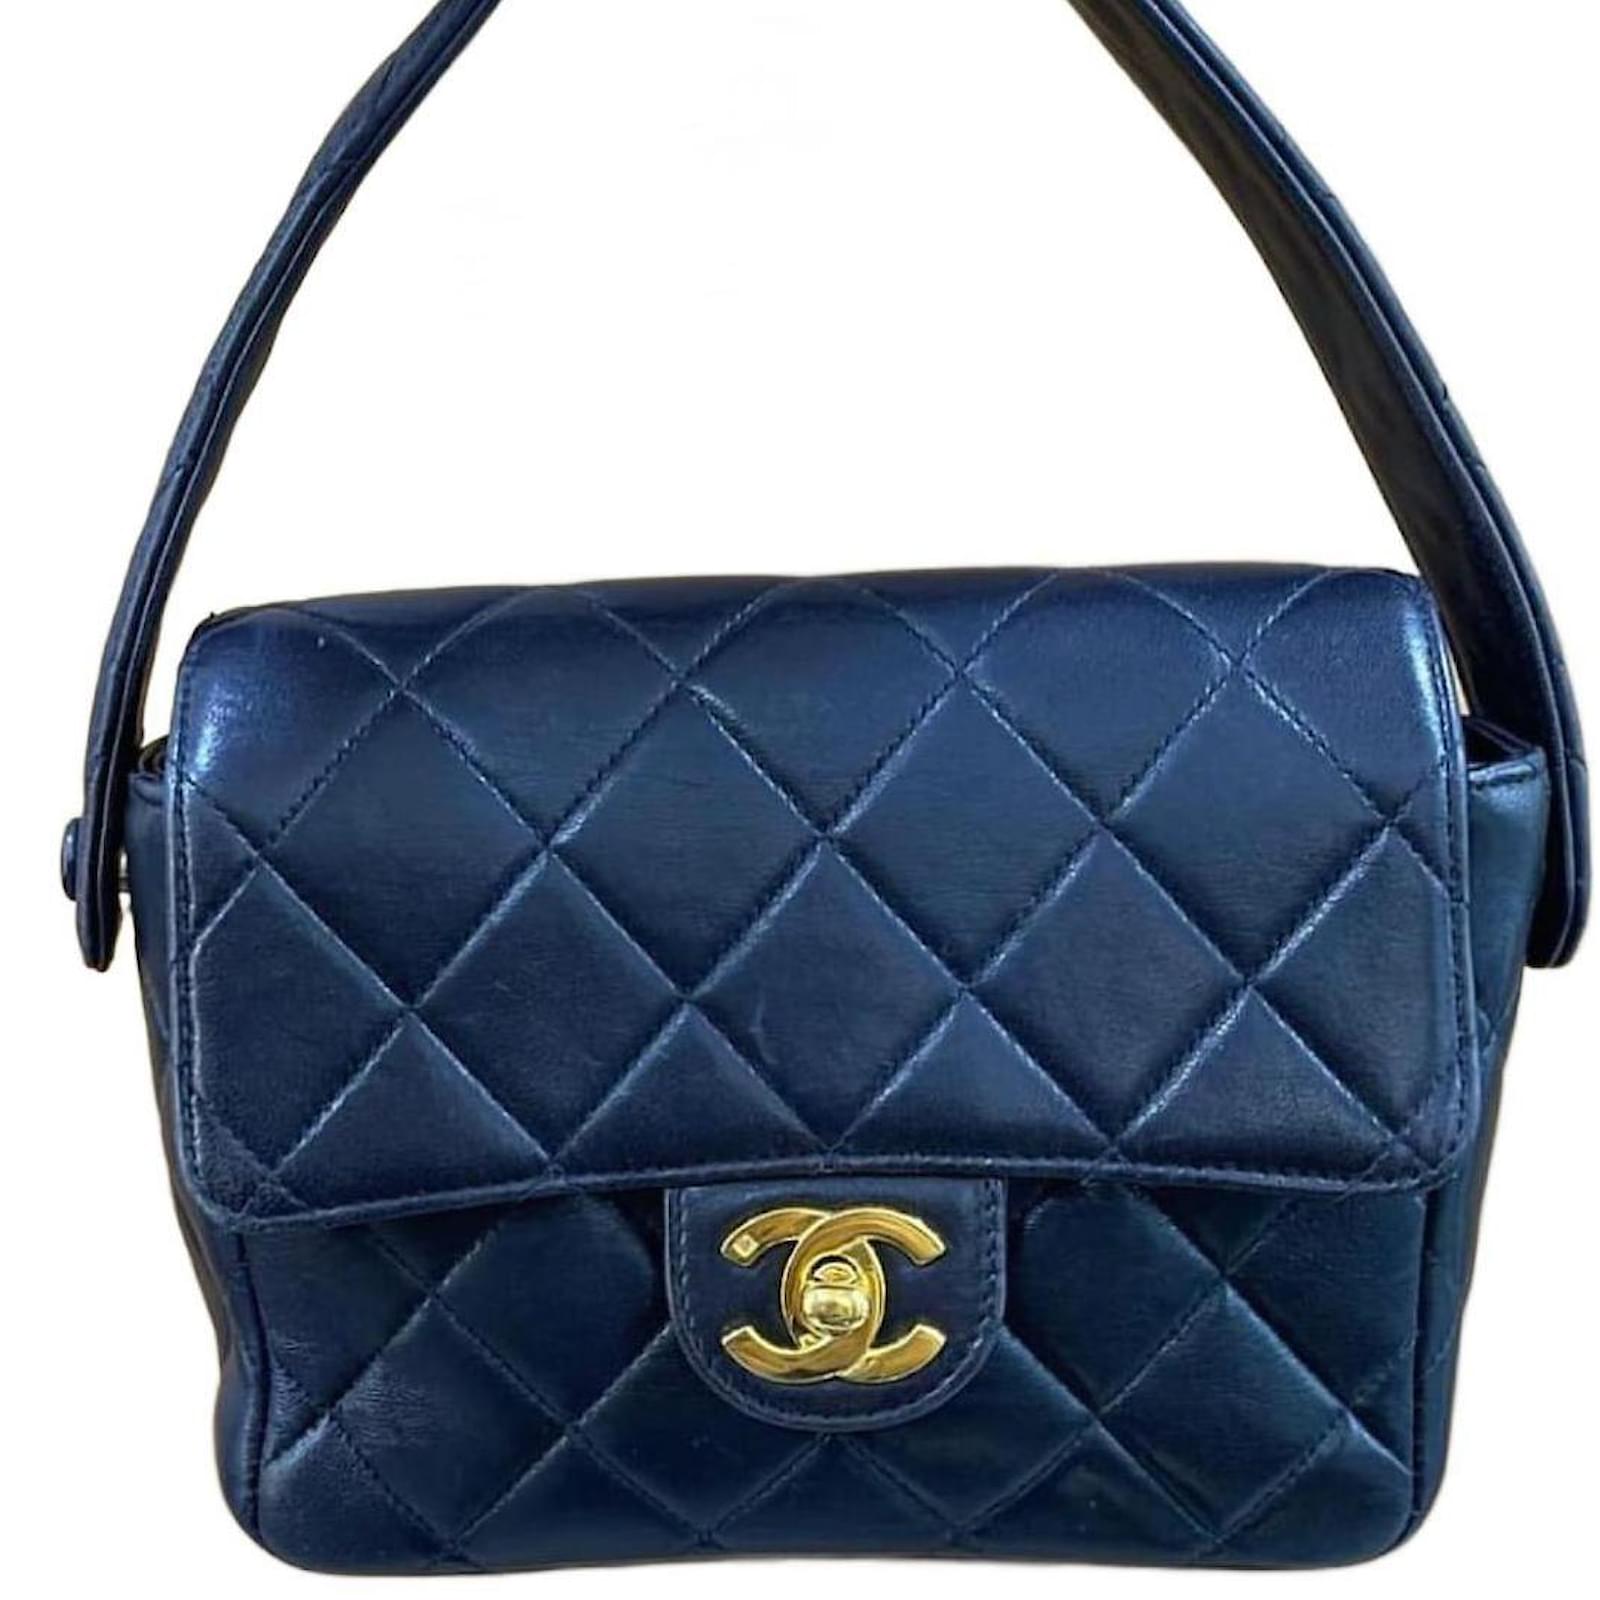 Handbags Chanel New Vintage Chanel Handbag Small Classic Timeless Quilted Leather Bag